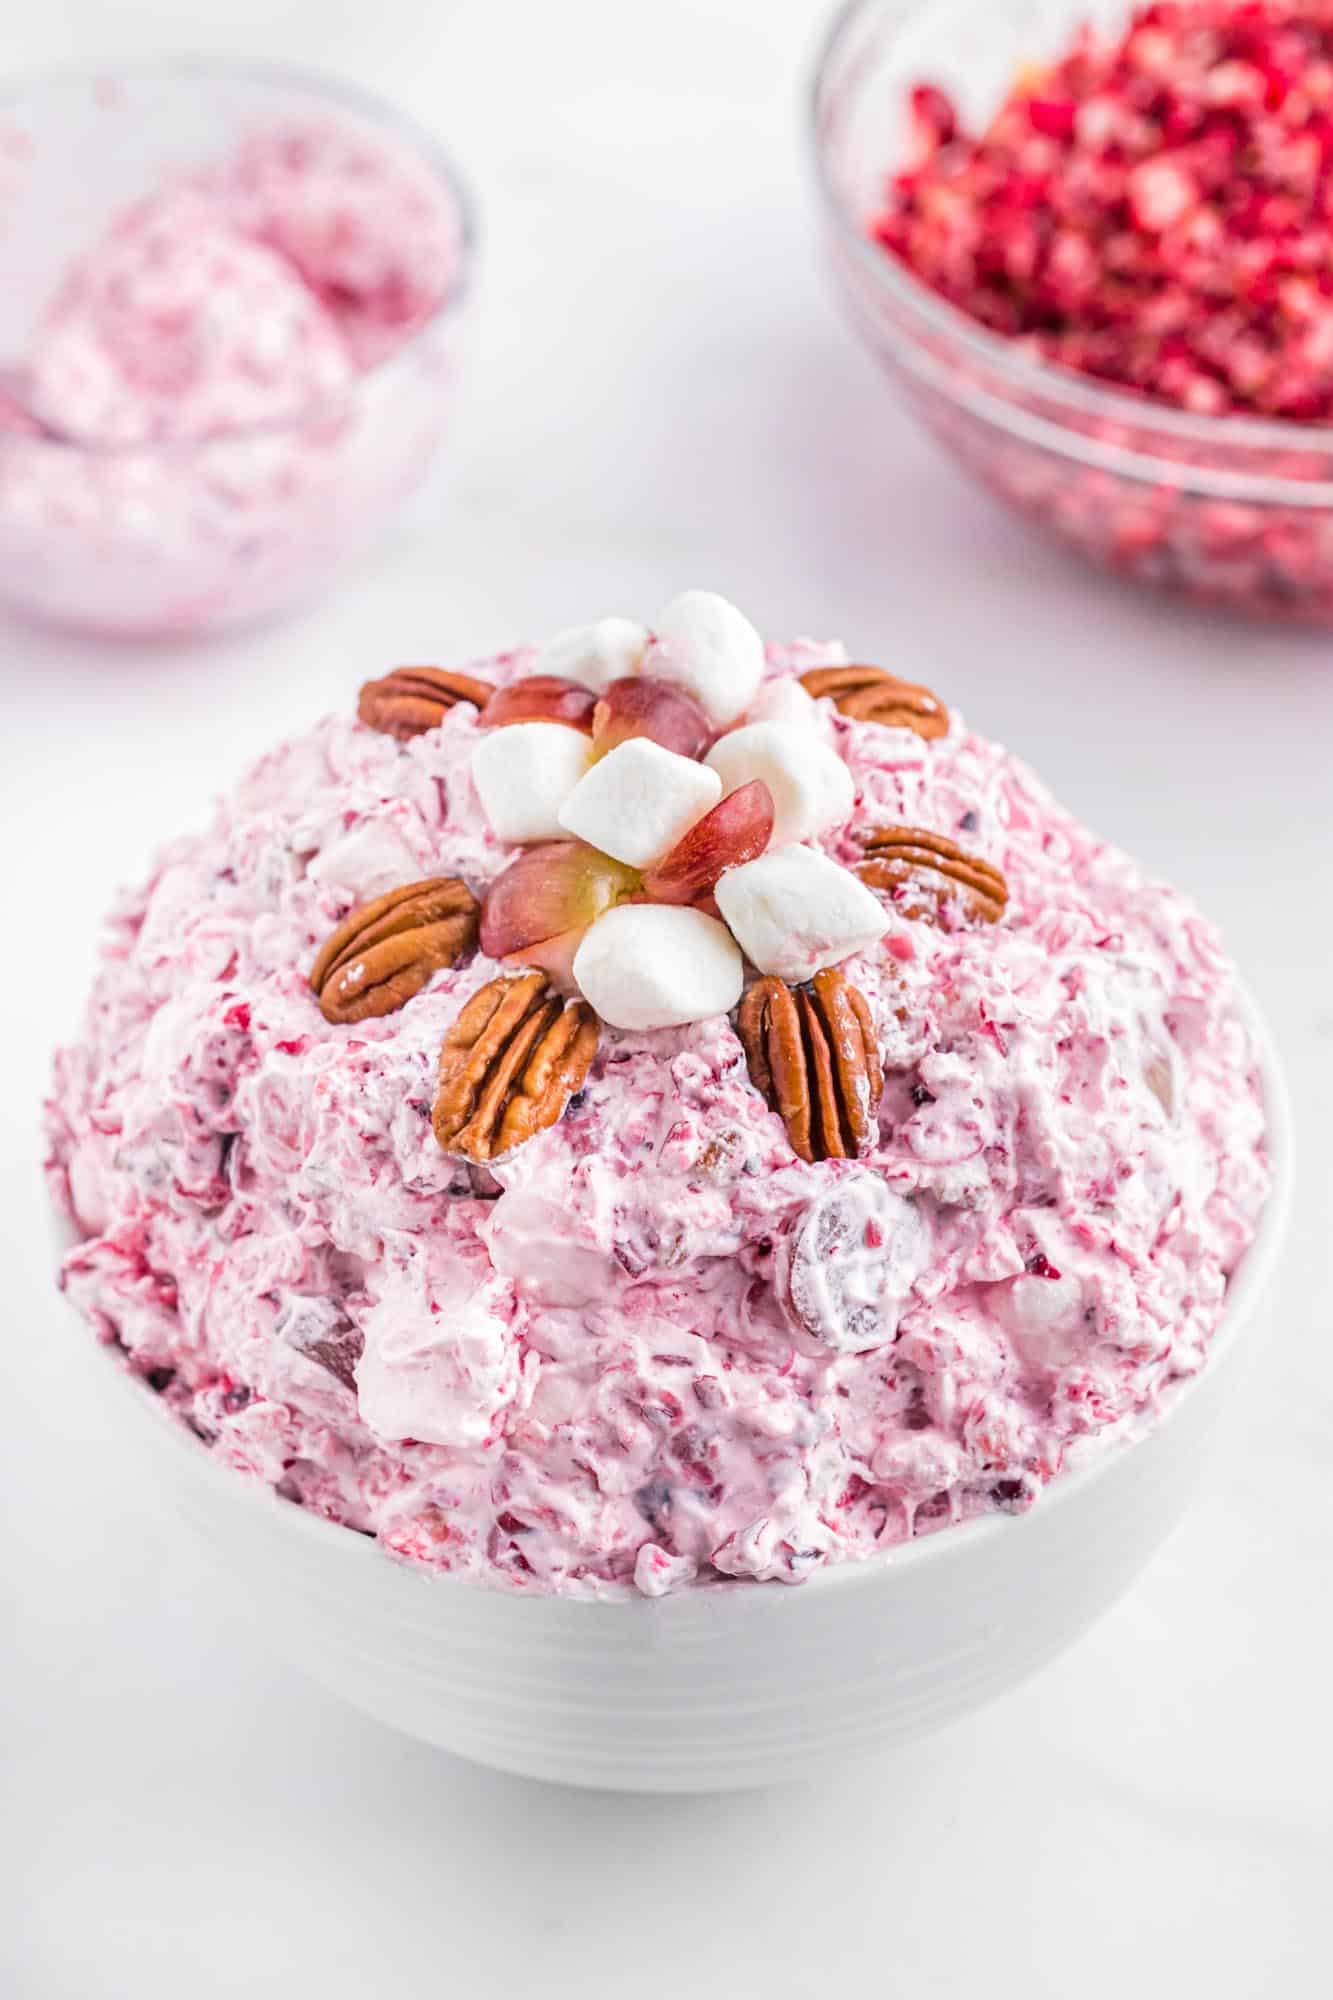 Cranberry fluff salad in a white bowl, topped with pecan halves and marshmallows